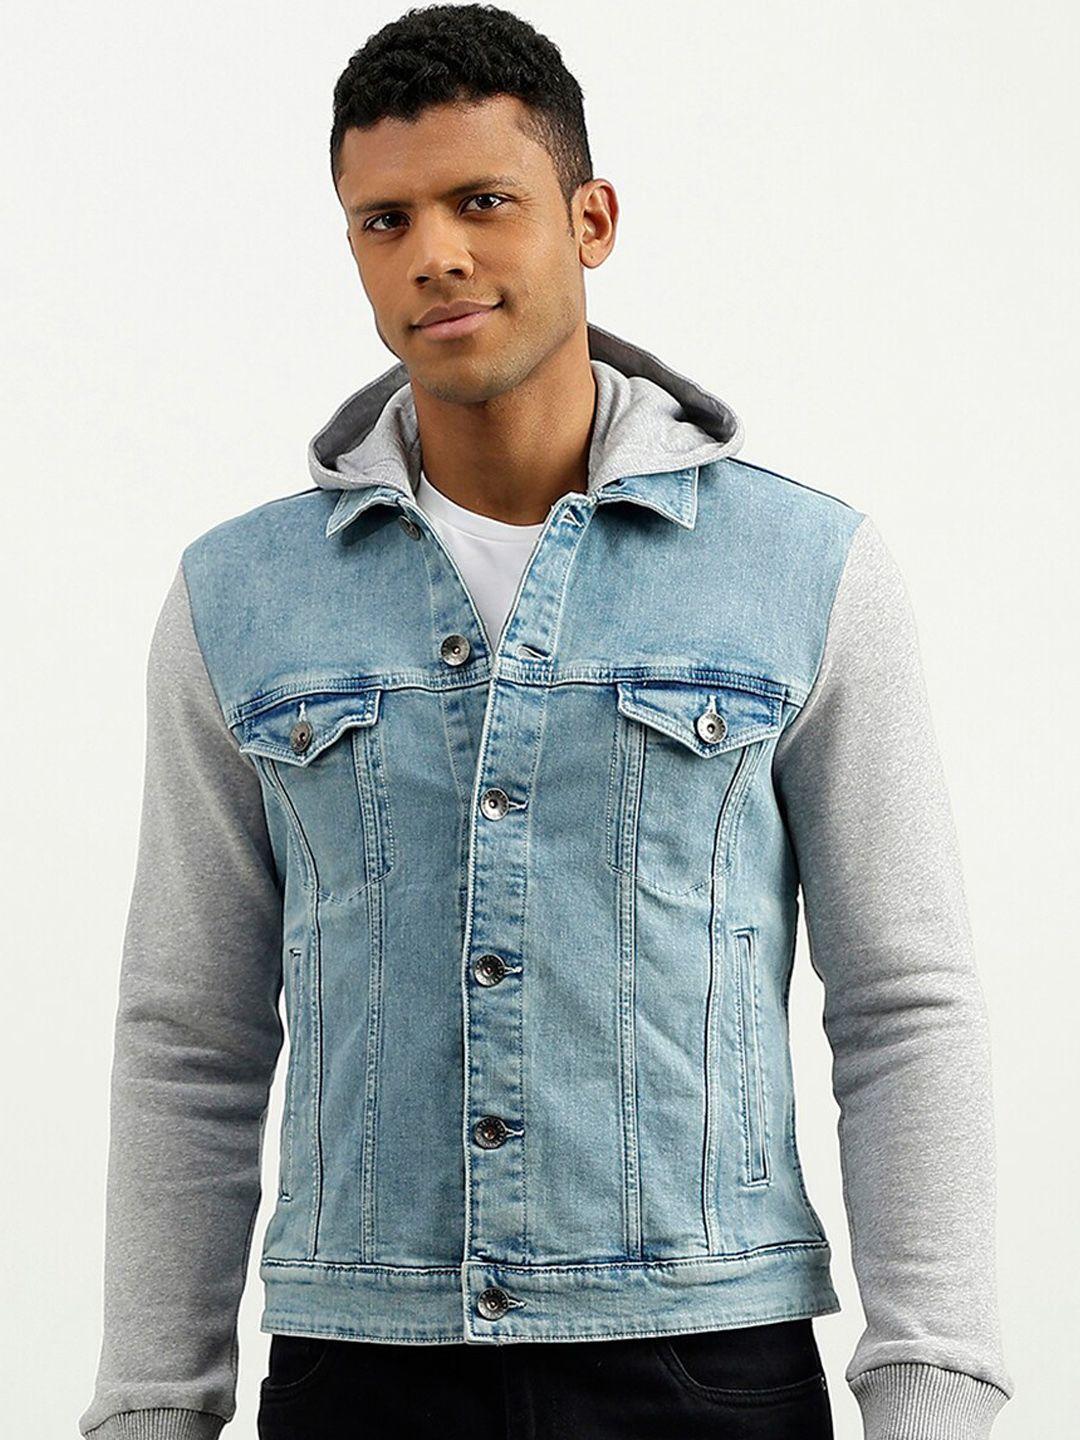 united-colors-of-benetton-men-blue-washed-denim-jacket-with-patchwork